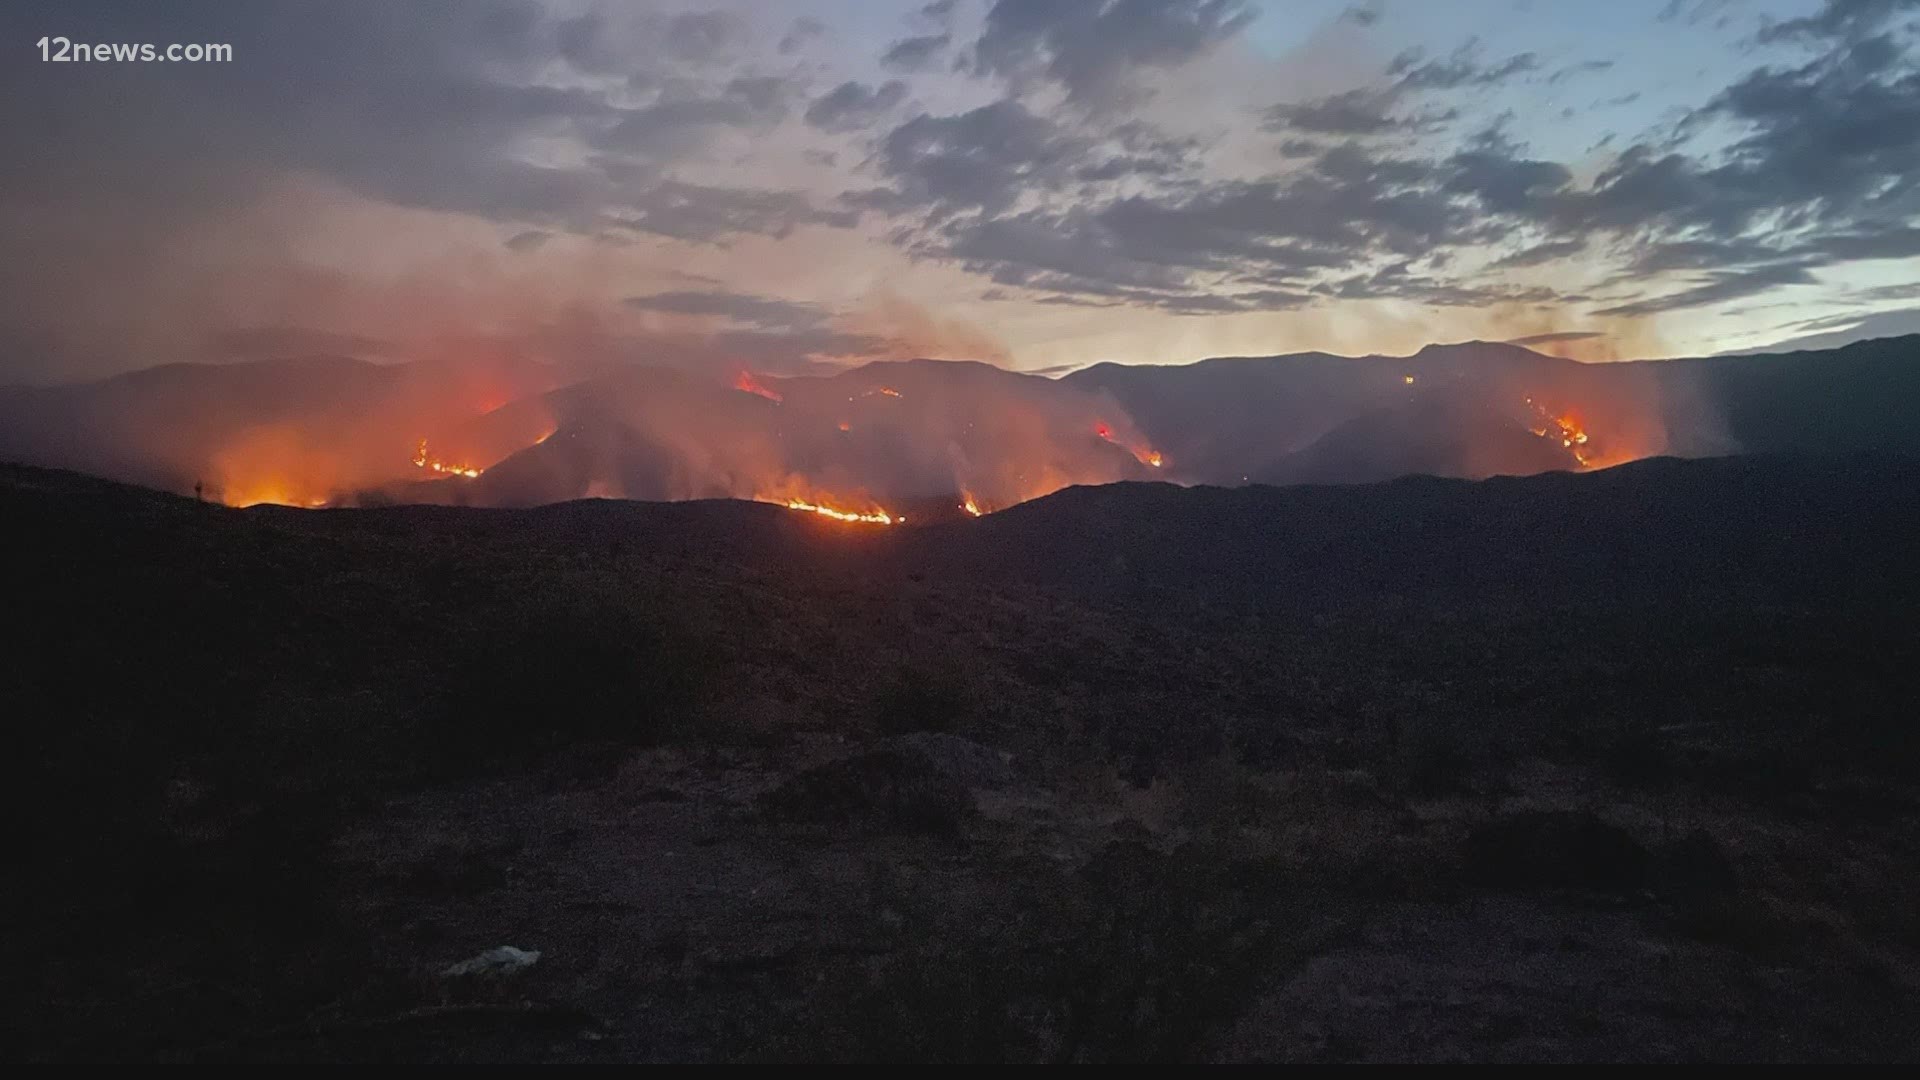 There are a few wildfires currently burning in Arizona. Ryan Cody has an update for July 5, 2021.